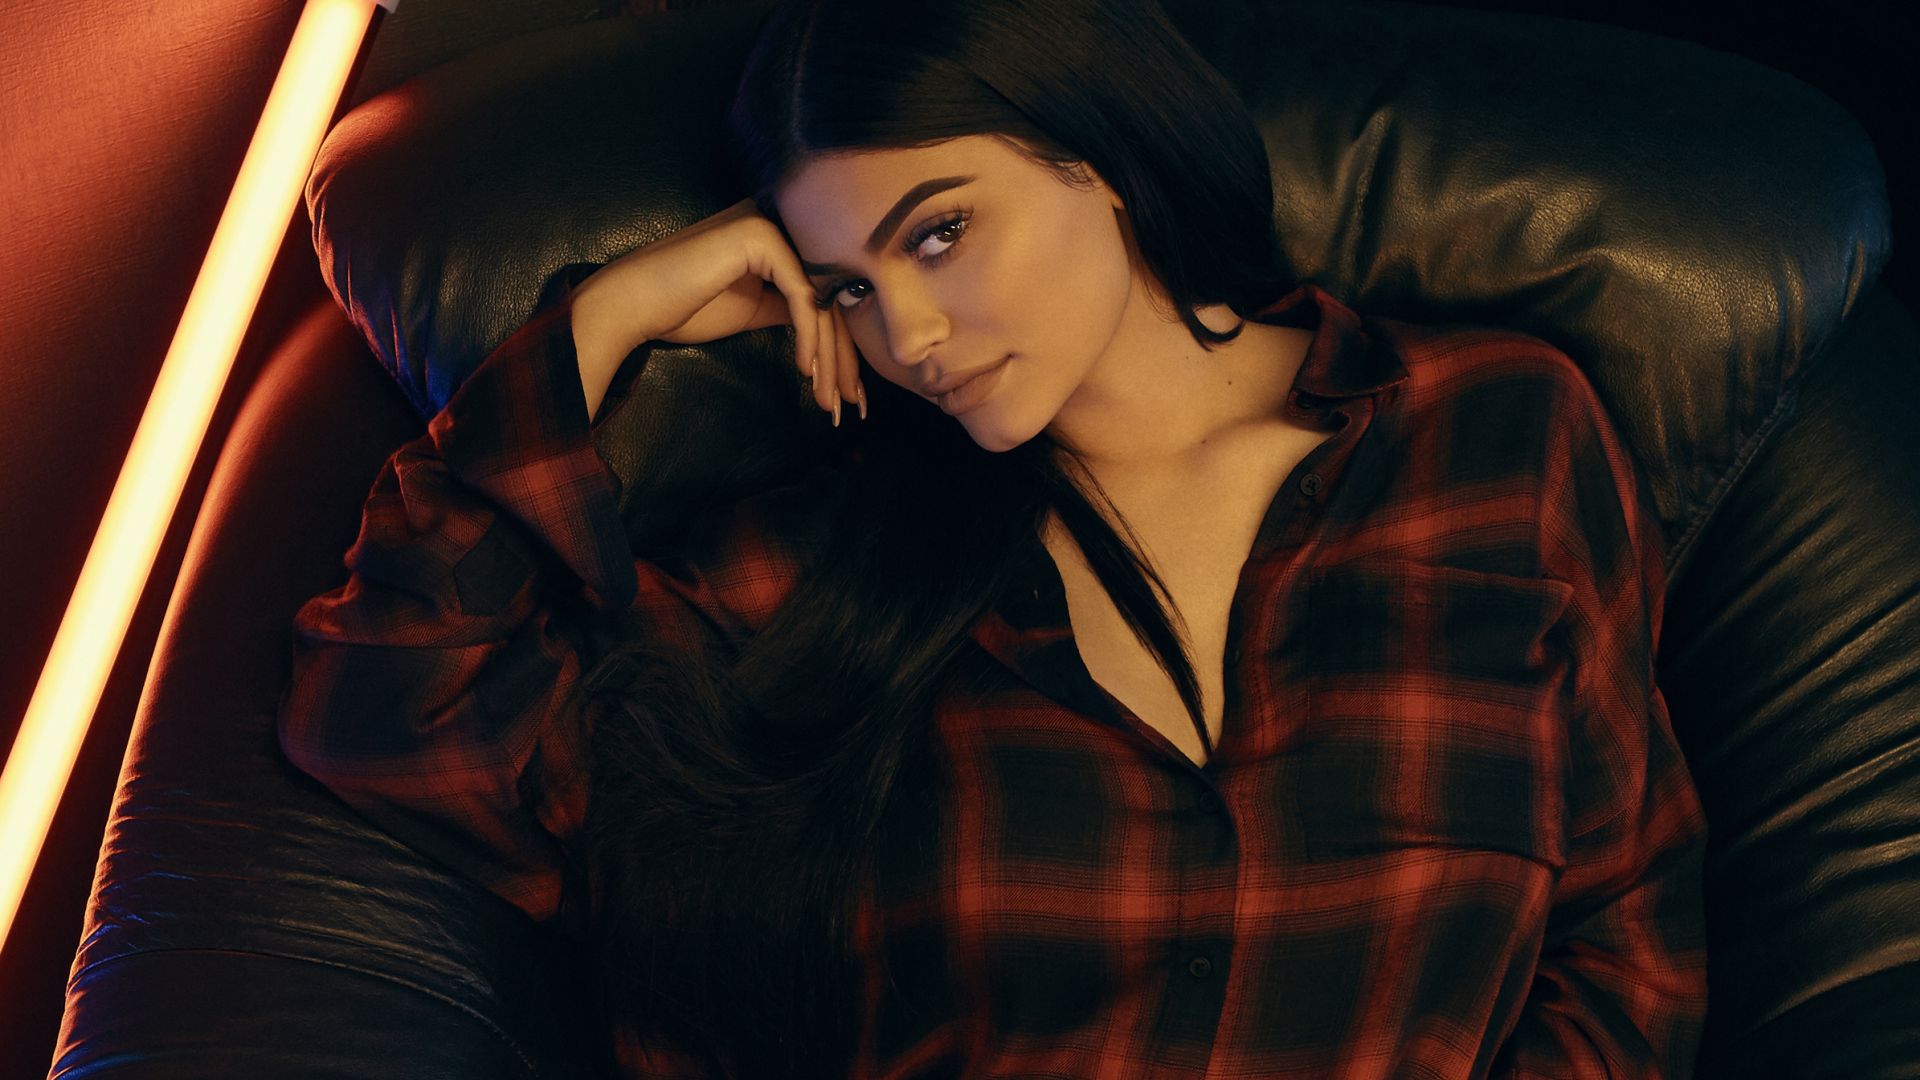 Wallpaper Kylie jenner, drop three collection, supermodel, 2017